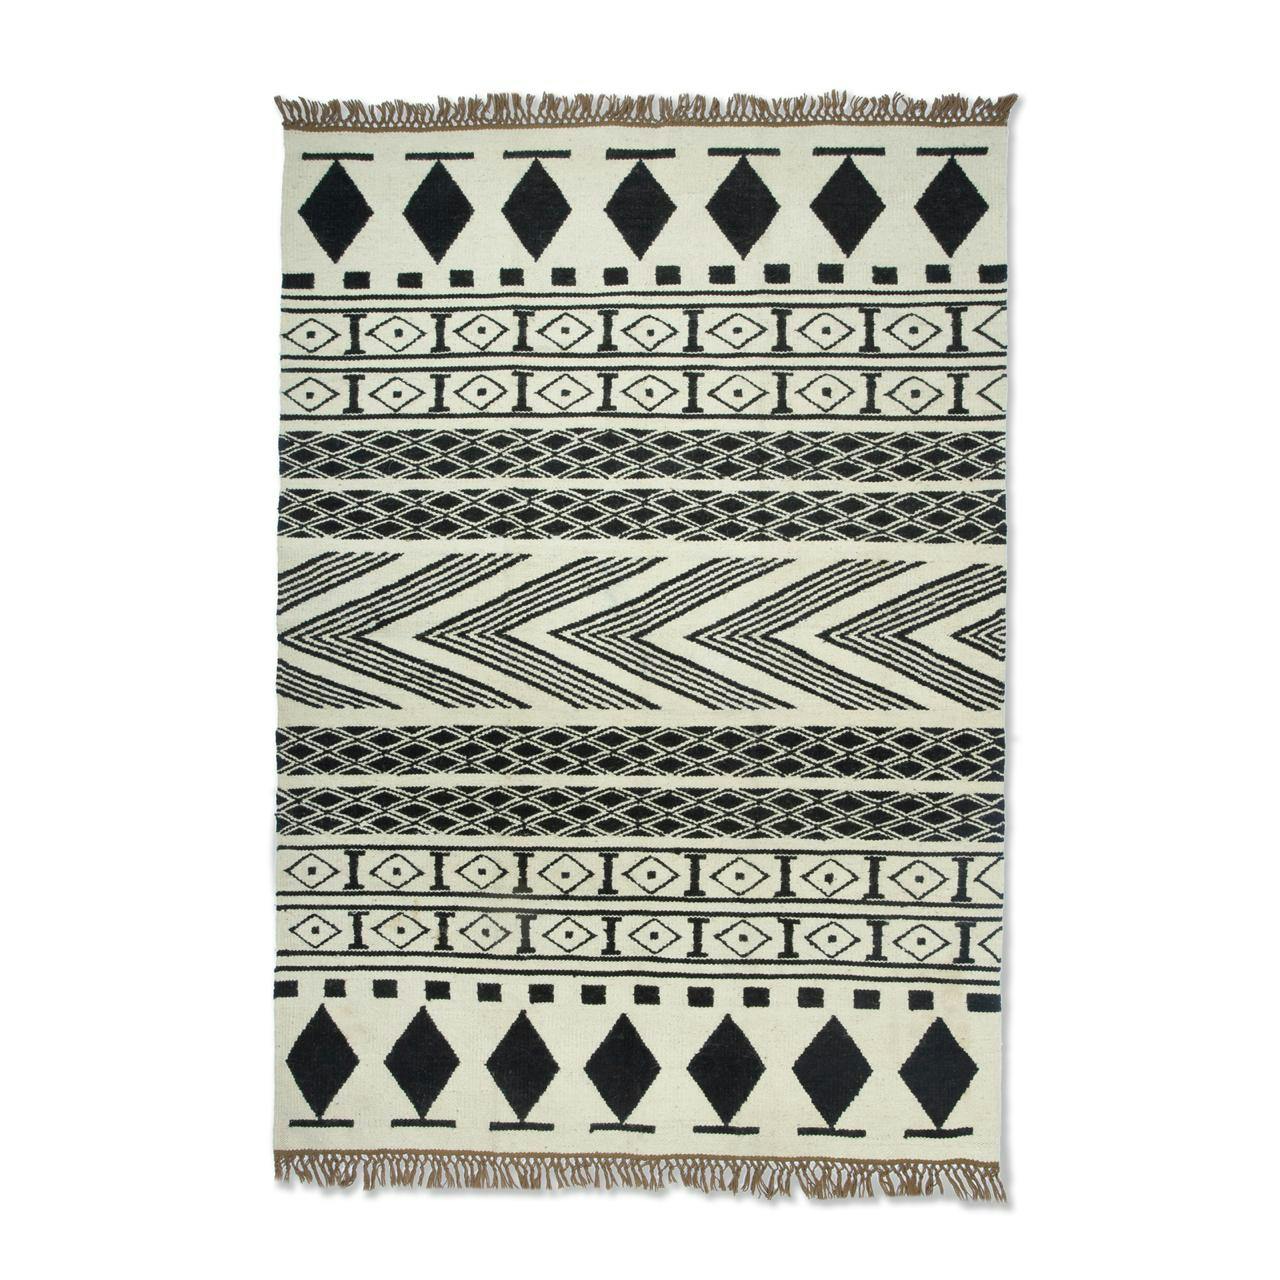 Black and White Patterned Rug 0